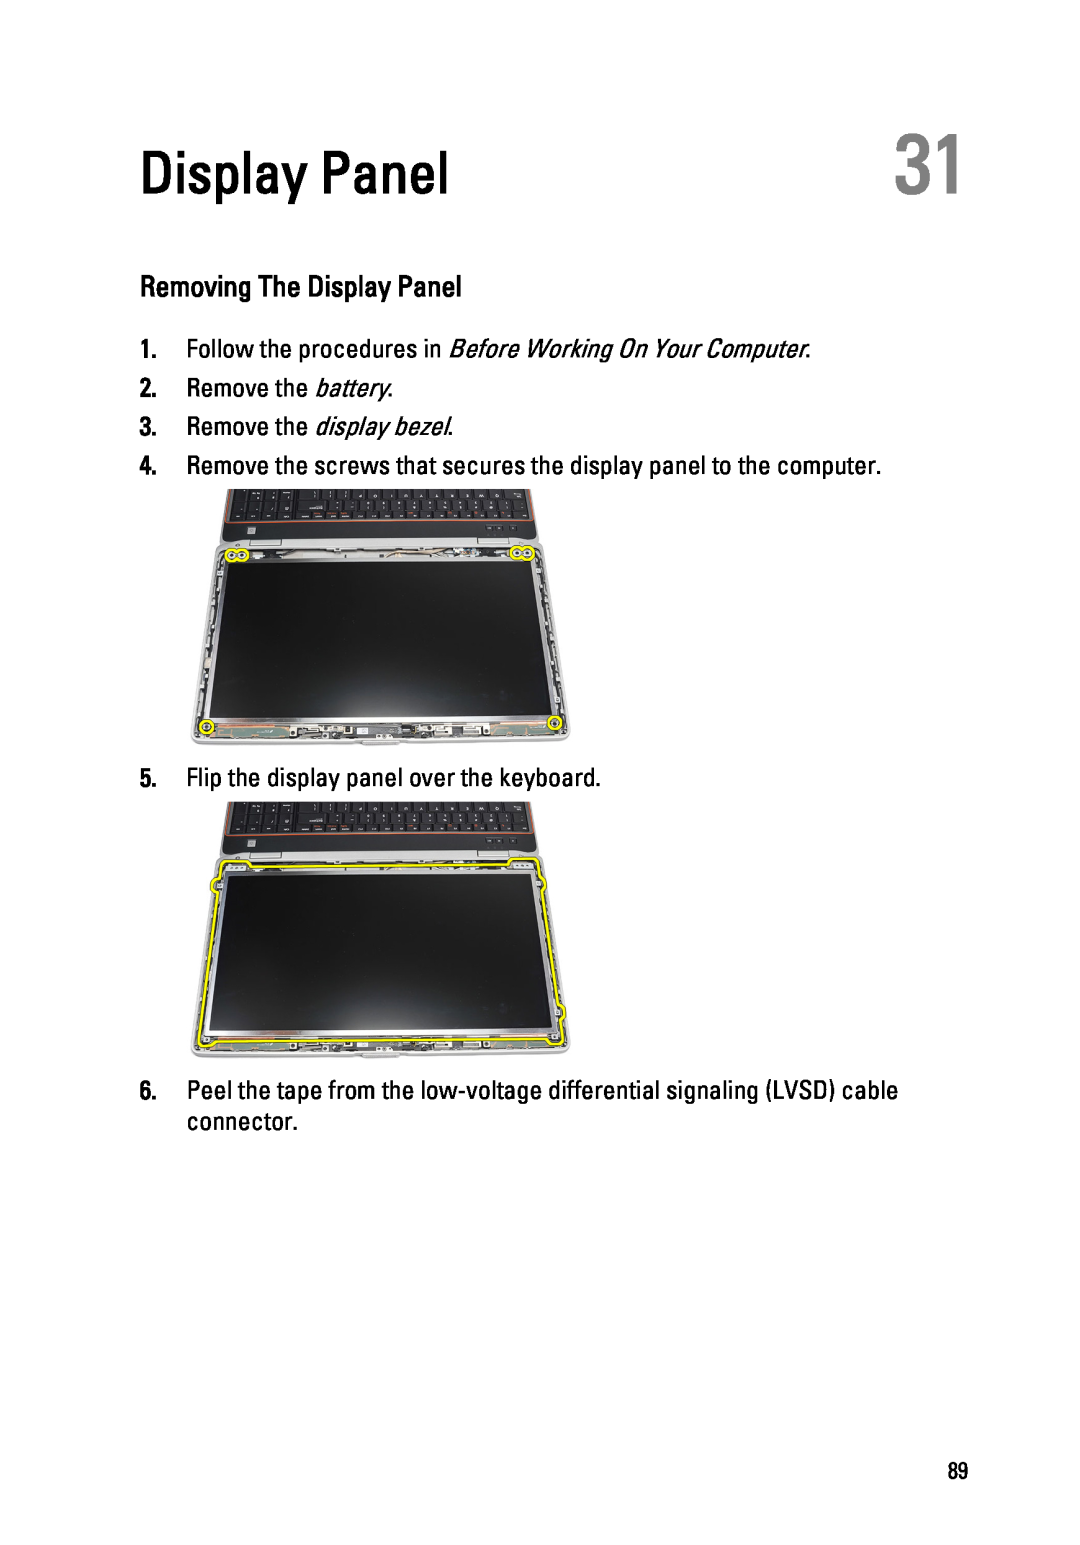 Dell E6520 owner manual Removing The Display Panel, Remove the display bezel, Flip the display panel over the keyboard 